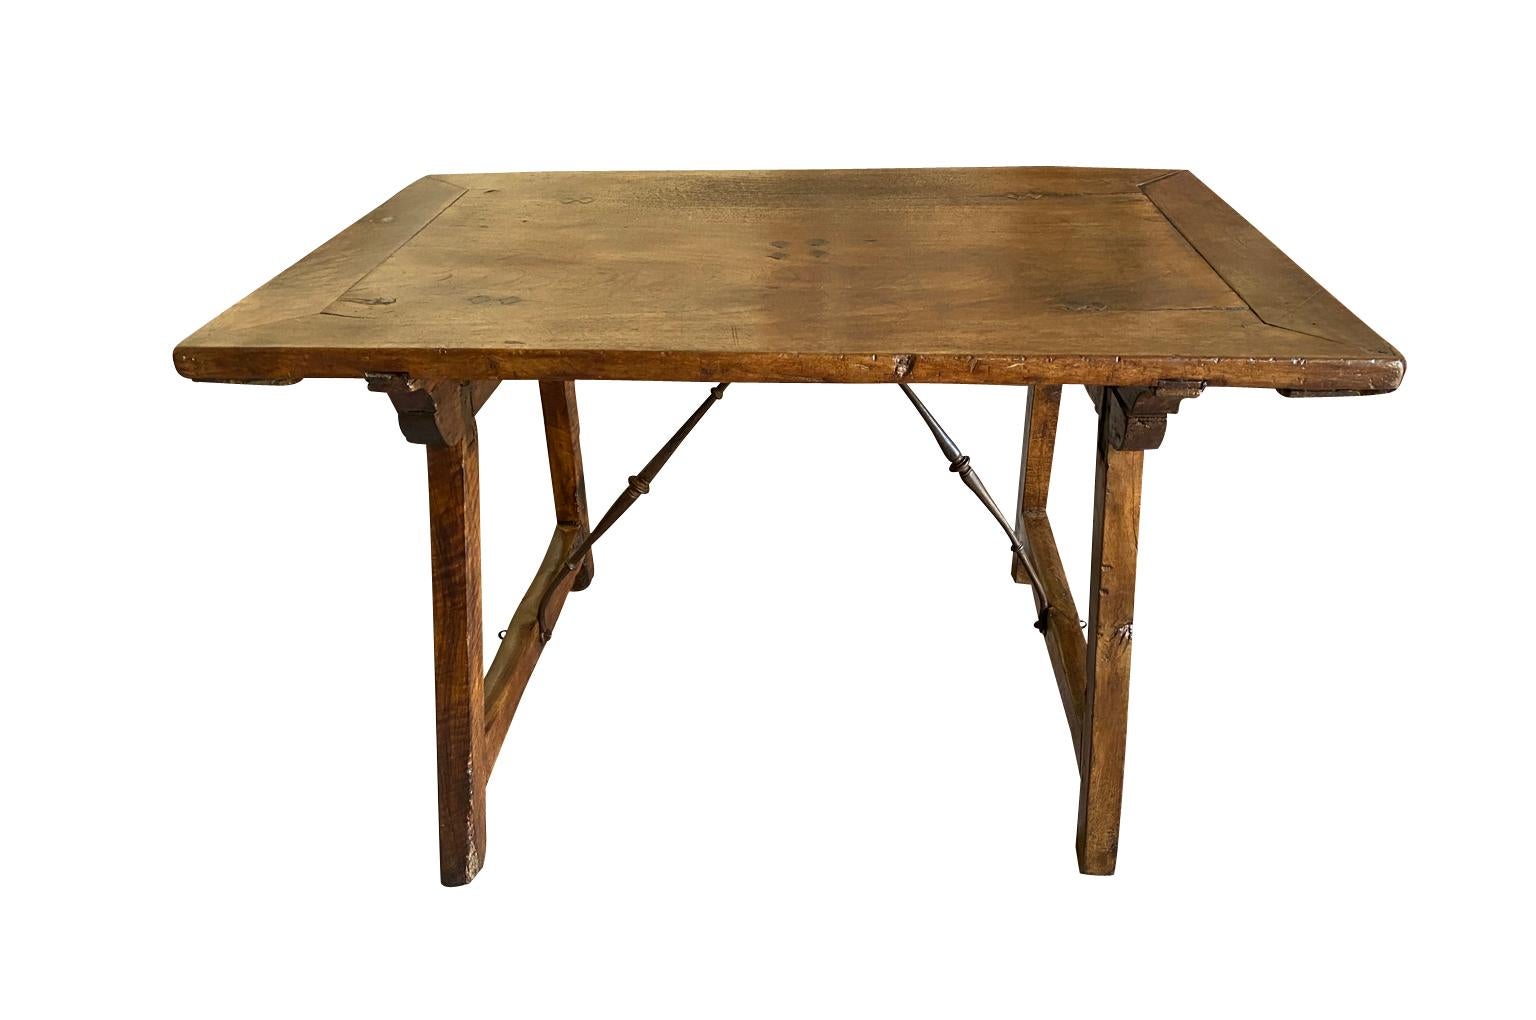 A wonderful 18th century traveling table - Desk from the Catalan region of Spain. Beautifully constructed from stunning walnut. Fabulous patina. Perfect as a writing table or side table.